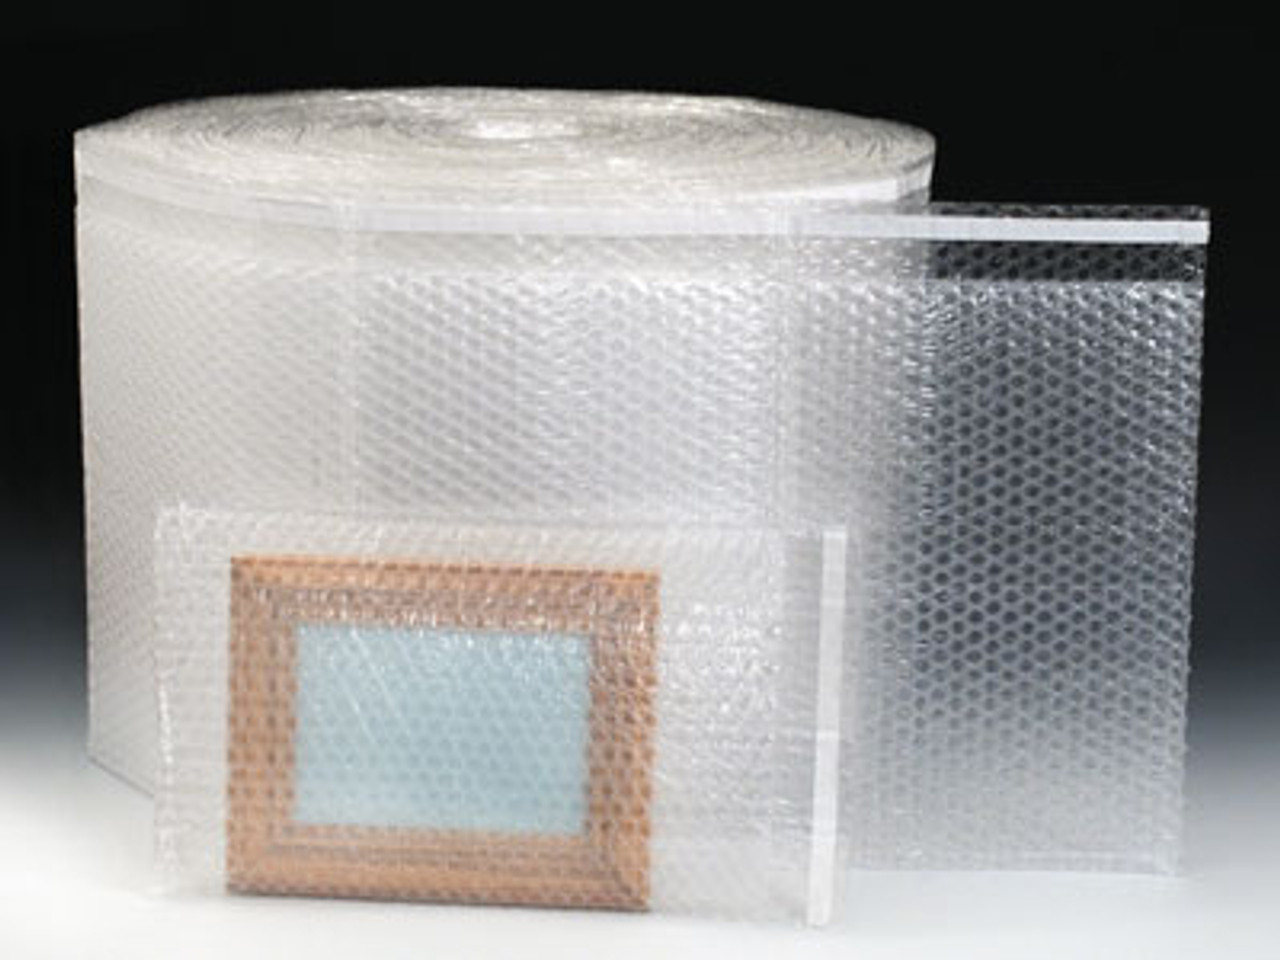 Sealed Air Bubble Wrap Brand Triple Layer Bubble Bags on a Roll (3/16") (Sold in Bundles)